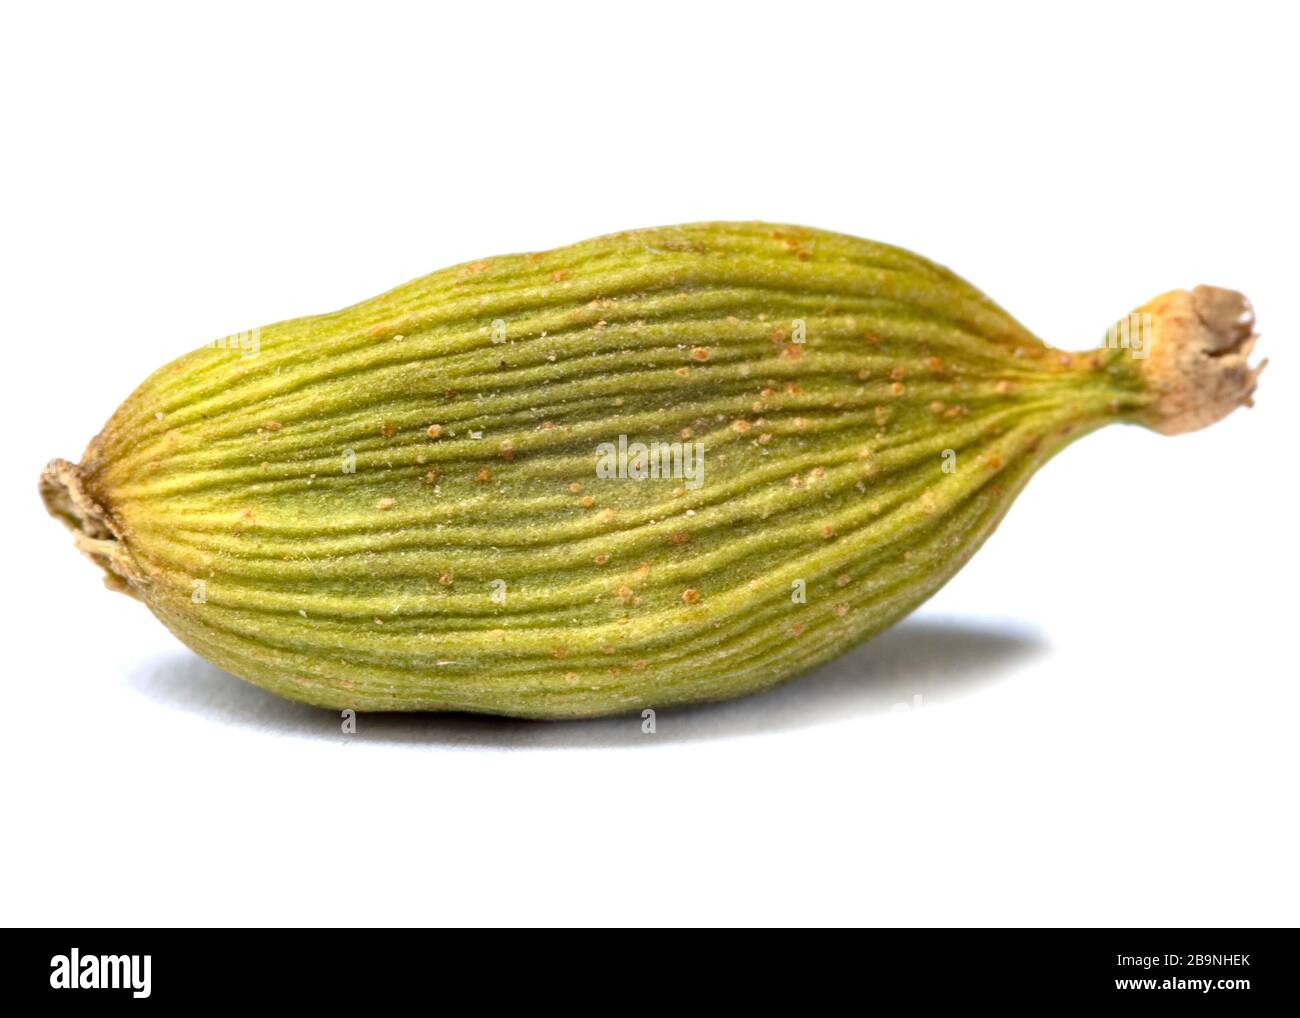 Macro closeup of Organic Green or True cardamom with seeds isolated on white background. Stock Photo